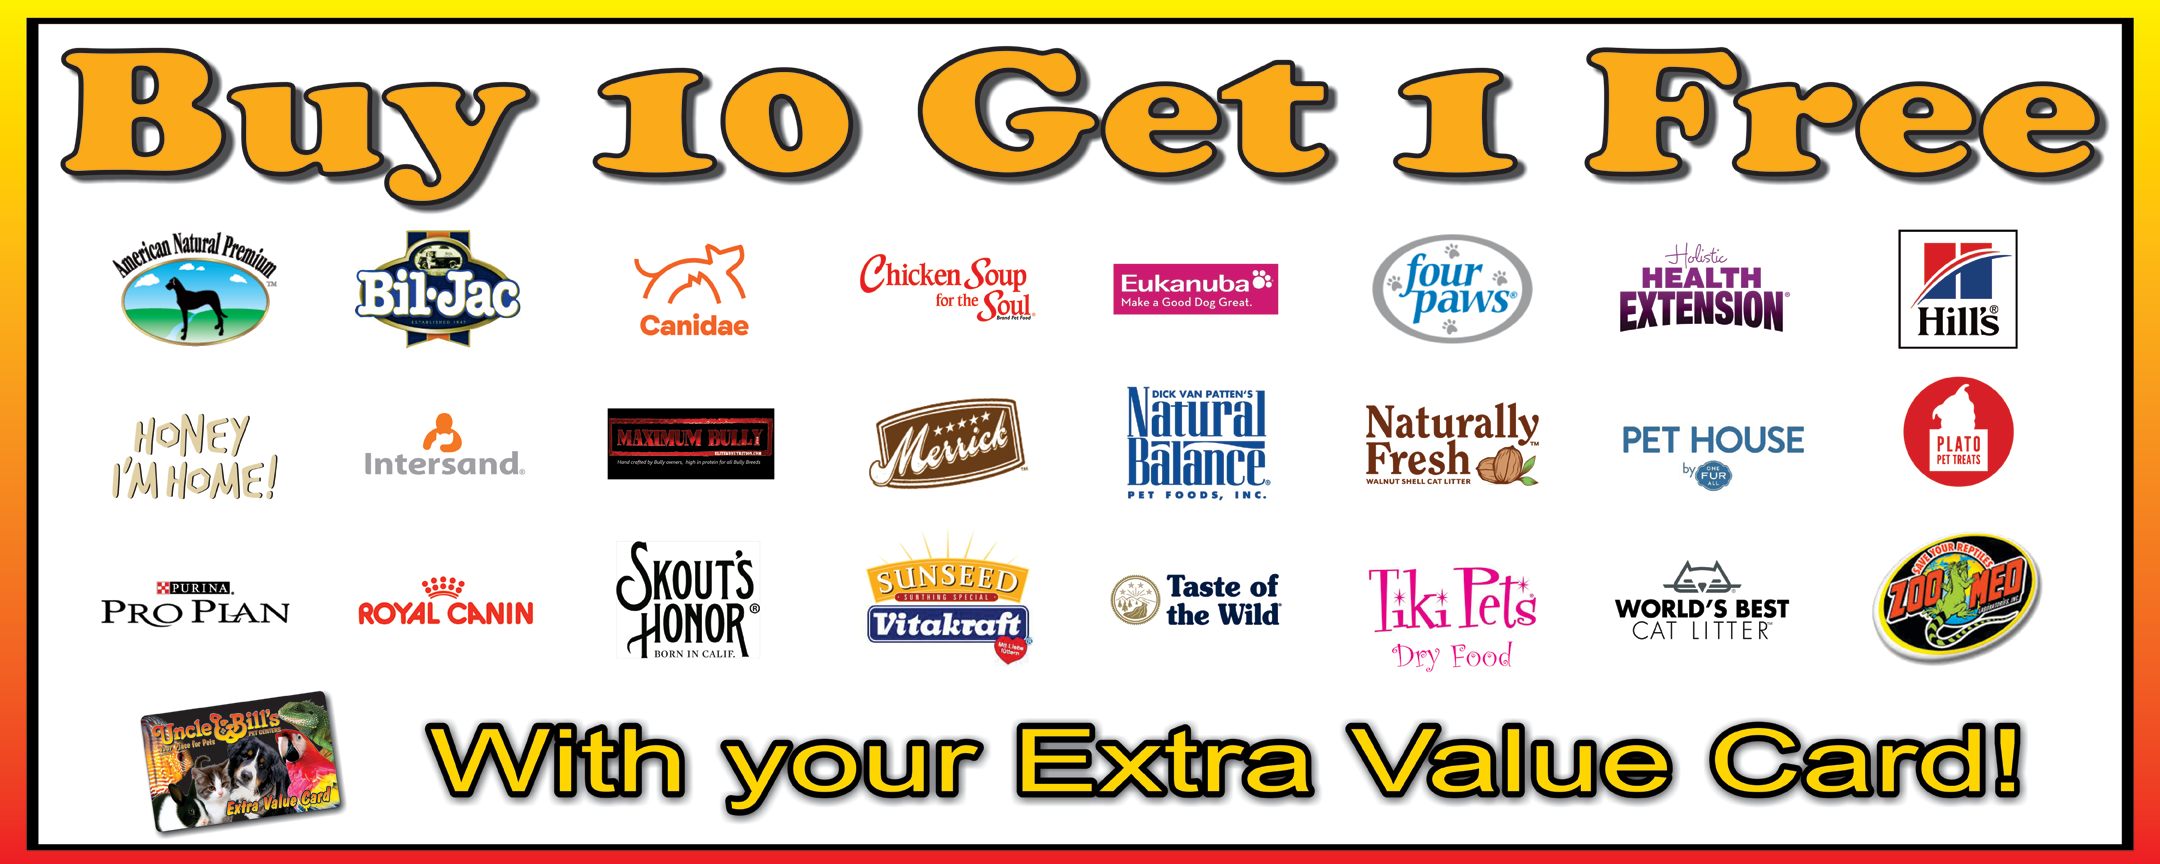 Uncle Bill's Buy 10 Get 1 Free Frequent Buyer Programs